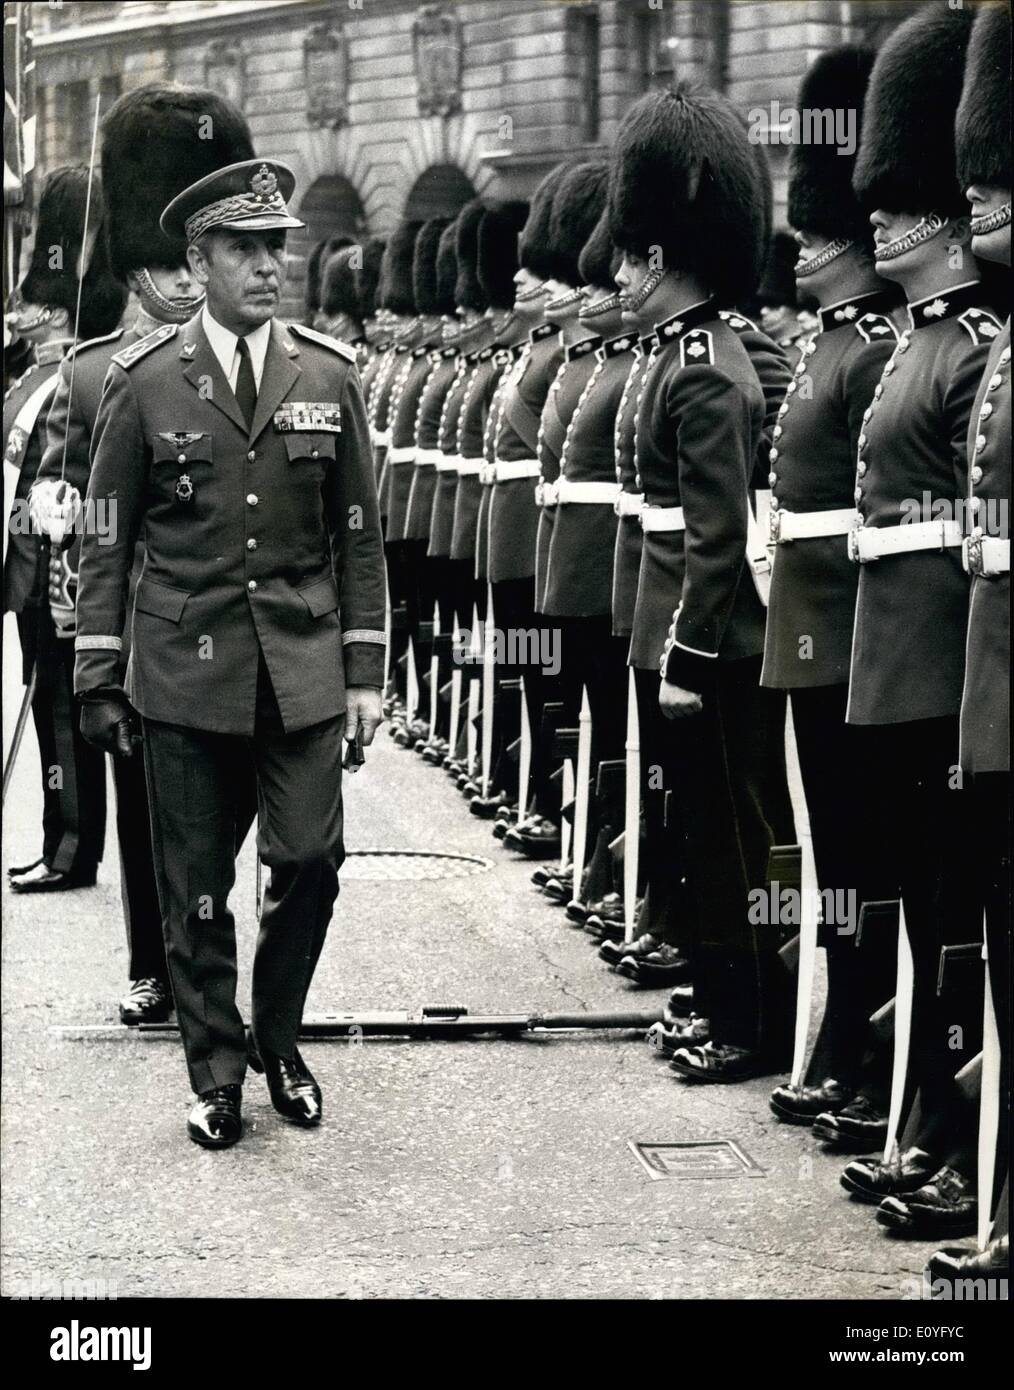 Apr. 04, 1970 - The Guardsman that dropped his rifle: During the inspection of the guard of honour by General De Brigade Drissem Nichi, Deputy Chief of the Defence Staff and Commander of the Royal Moroccan Air Force, outside the Ministry of Defence in Whitehall today, one member of the guard, provided by the 2nd. Battalion Grenadier Guards, nearly fainted and dropped his rifle. Photo shows As General De Brigade Driss  Michi inspects the guard of honour the guardsman sways forward and drops his rifle during a fainting spell. Stock Photo